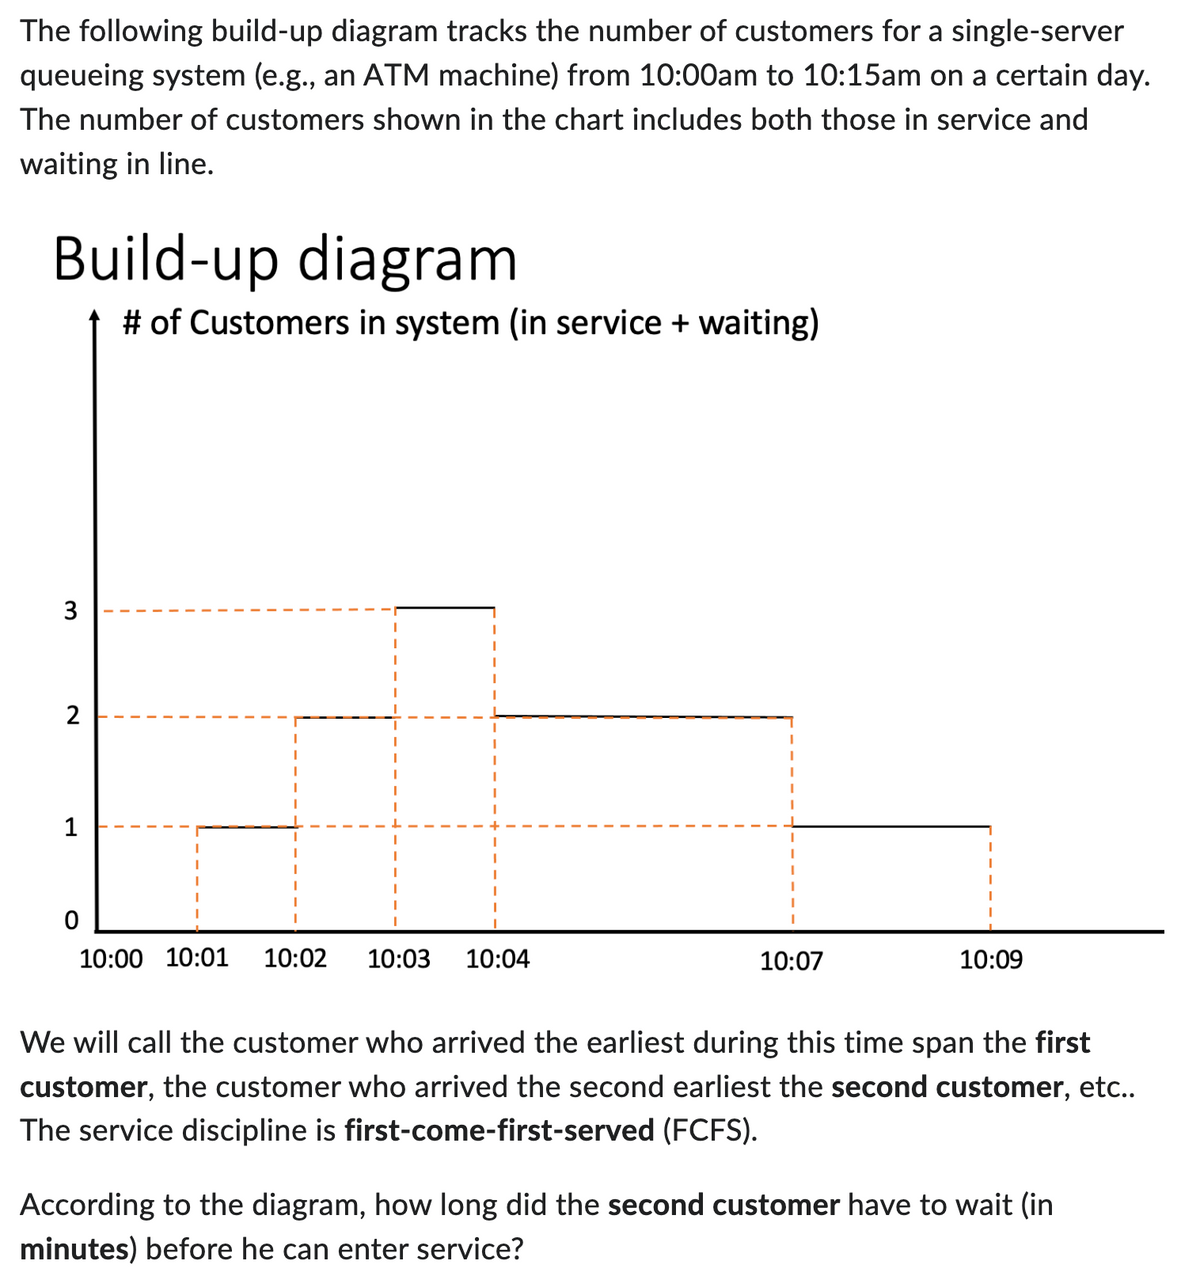 The following build-up diagram tracks the number of customers for a single-server
queueing system (e.g., an ATM machine) from 10:00am to 10:15am on a certain day.
The number of customers shown in the chart includes both those in service and
waiting in line.
Build-up diagram
# of Customers in system (in service + waiting)
3
2
1
0
10:00 10:01
10:02 10:03 10:04
10:07
10:09
We will call the customer who arrived the earliest during this time span the first
customer, the customer who arrived the second earliest the second customer, etc..
The service discipline is first-come-first-served (FCFS).
According to the diagram, how long did the second customer have to wait (in
minutes) before he can enter service?